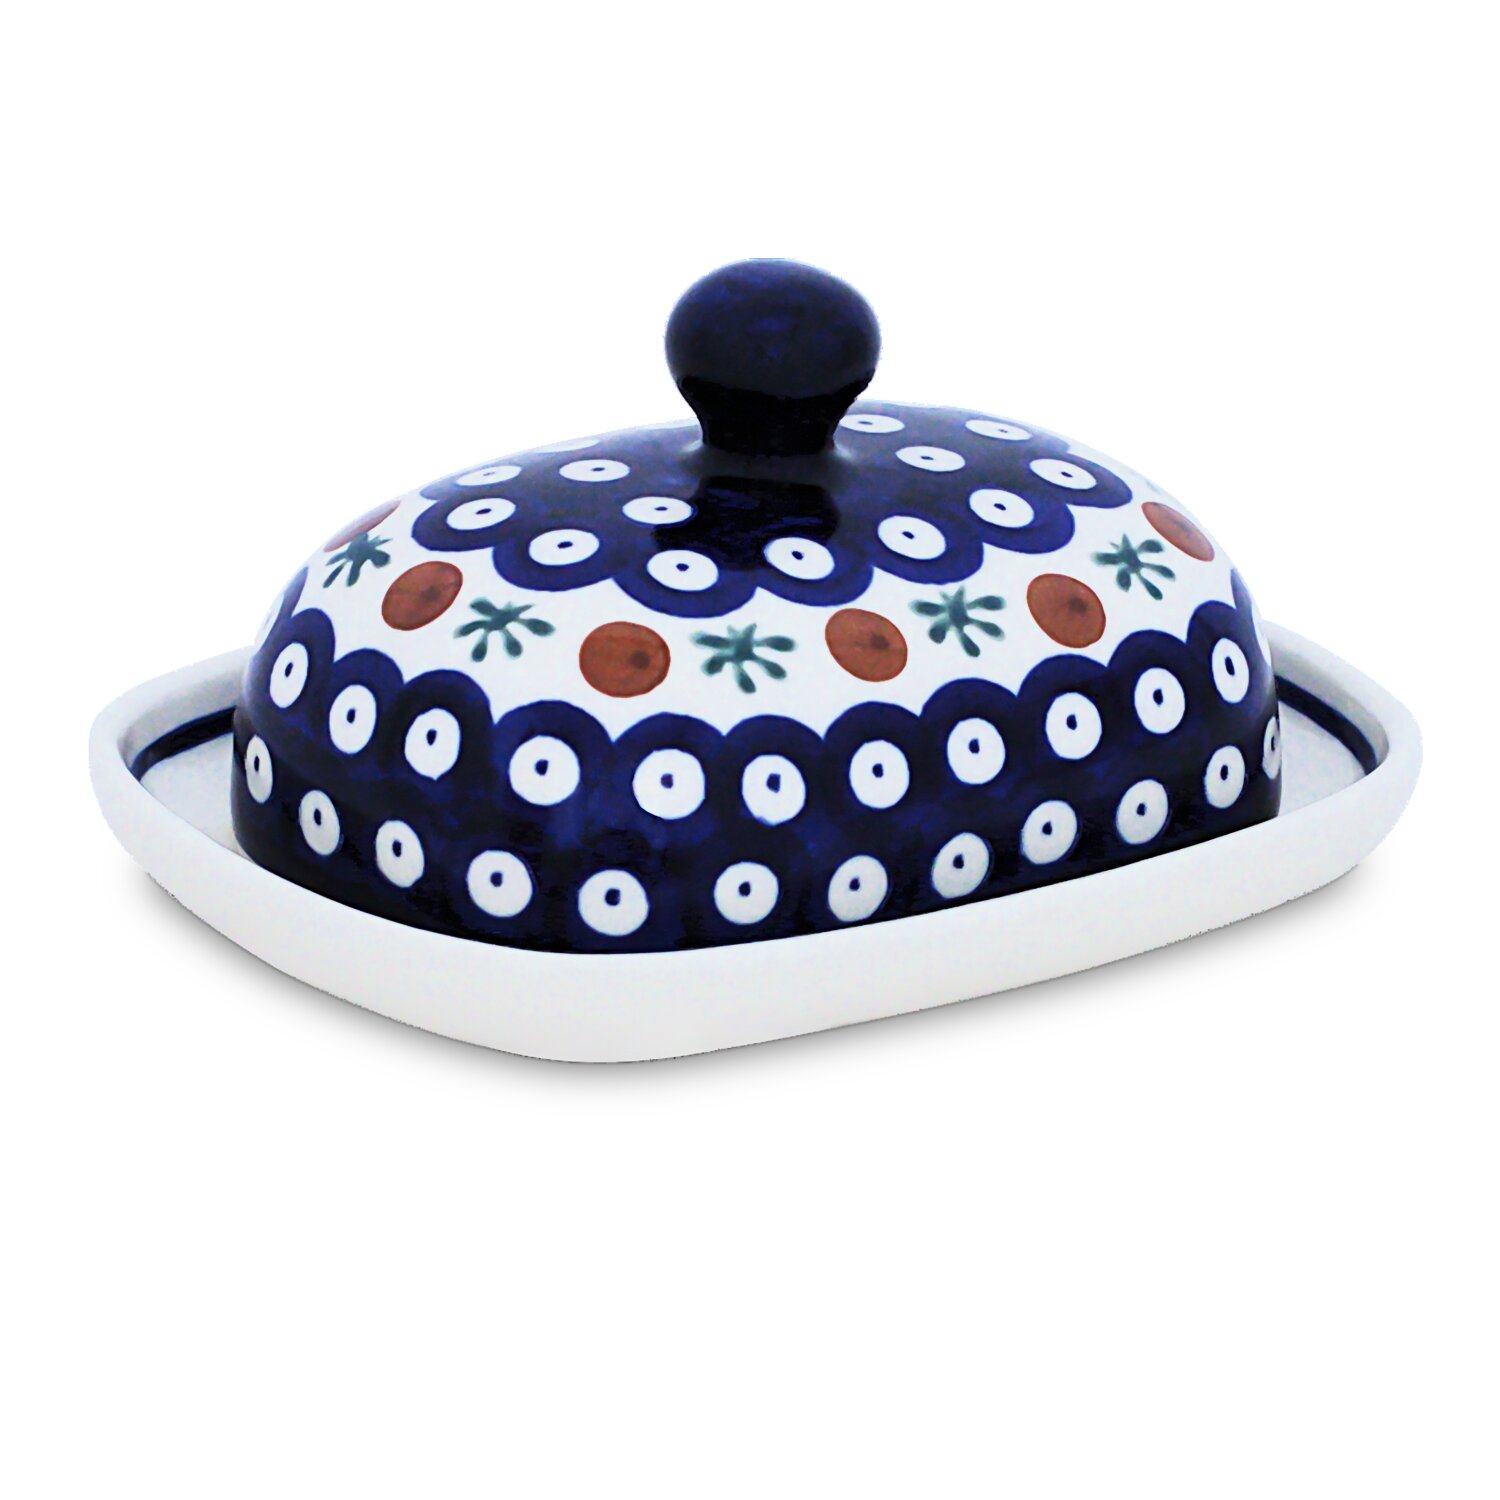 Small butter dish in the decor 41, 19,99